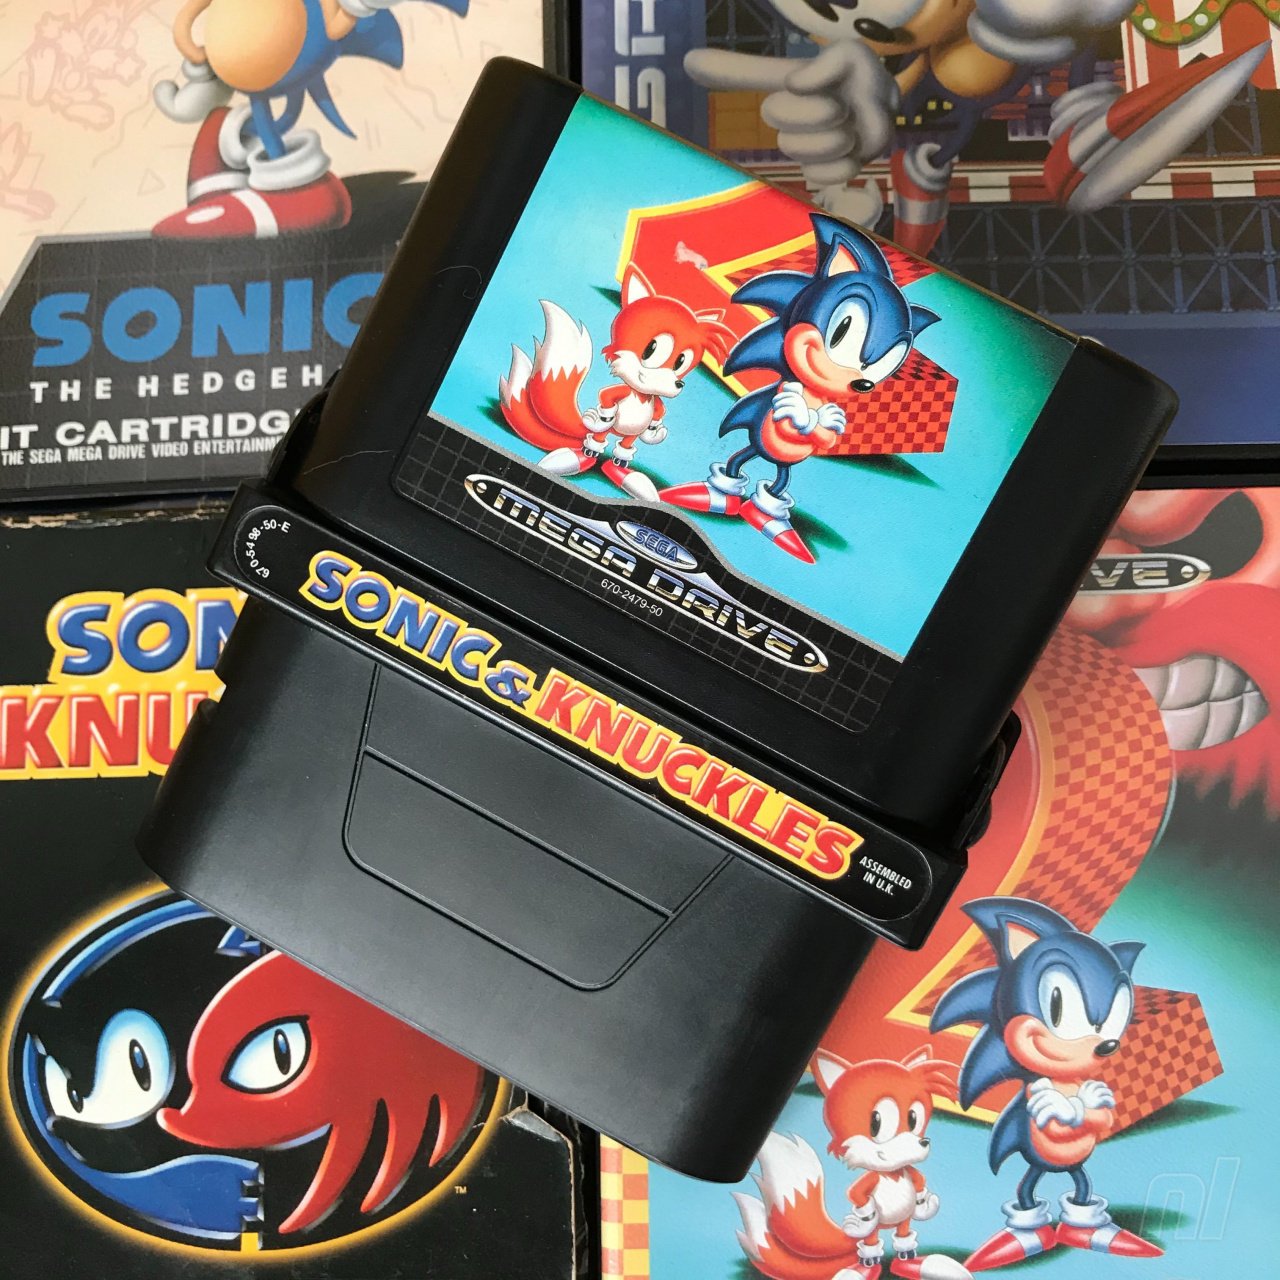 Knuckles The Echidna To Return In Lock On Form To Sonic The Hedgehog 2 On Switch Nintendo Life